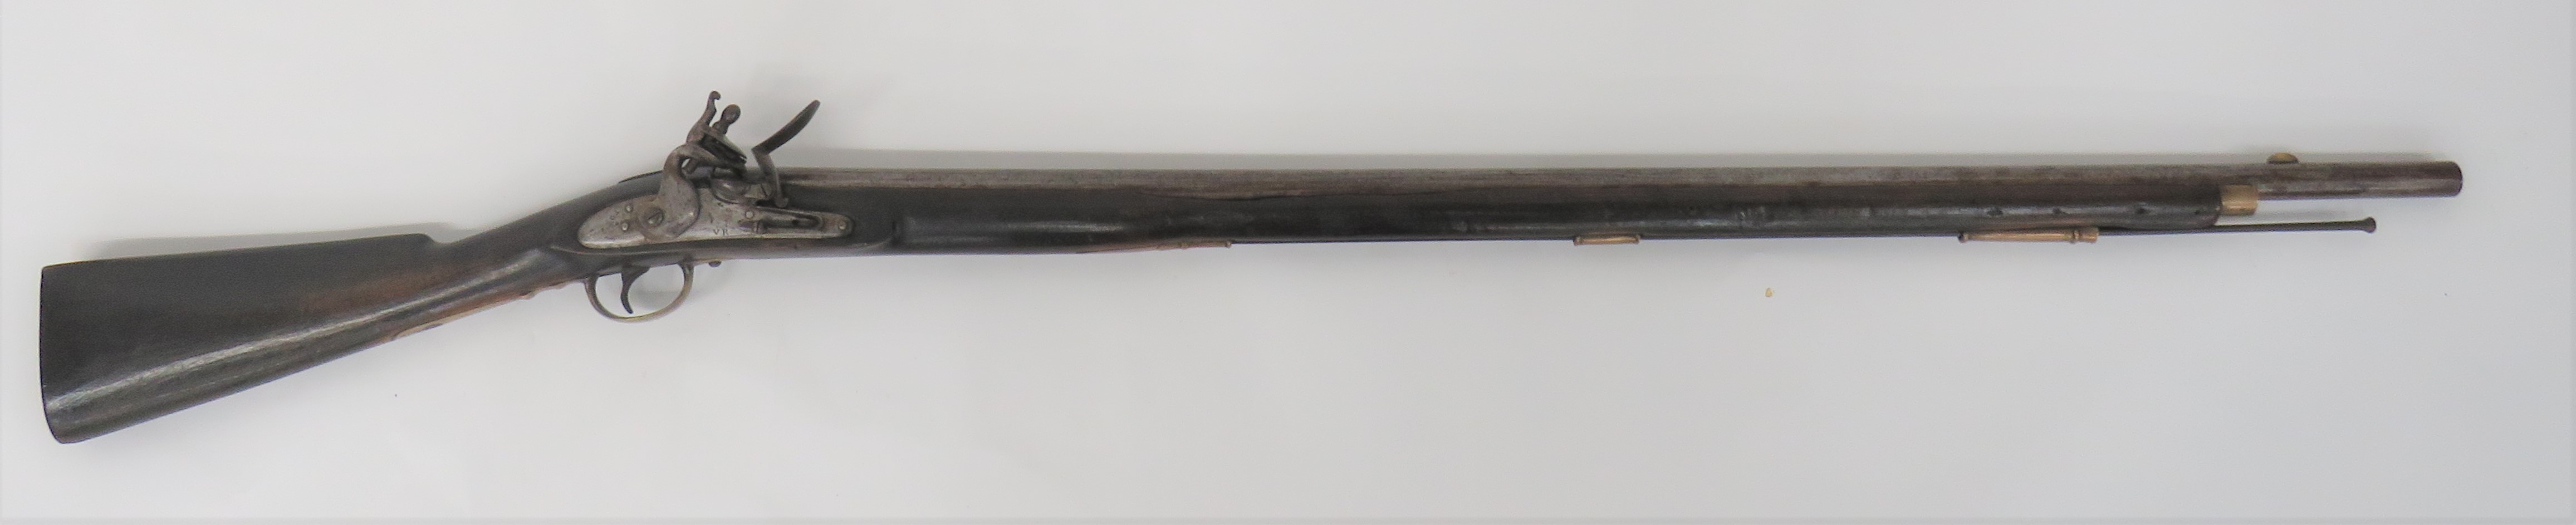 Early 19th Century Military Trade Flintlock Musket 42 1/4 inch, .750 musket, smooth bore barrel.